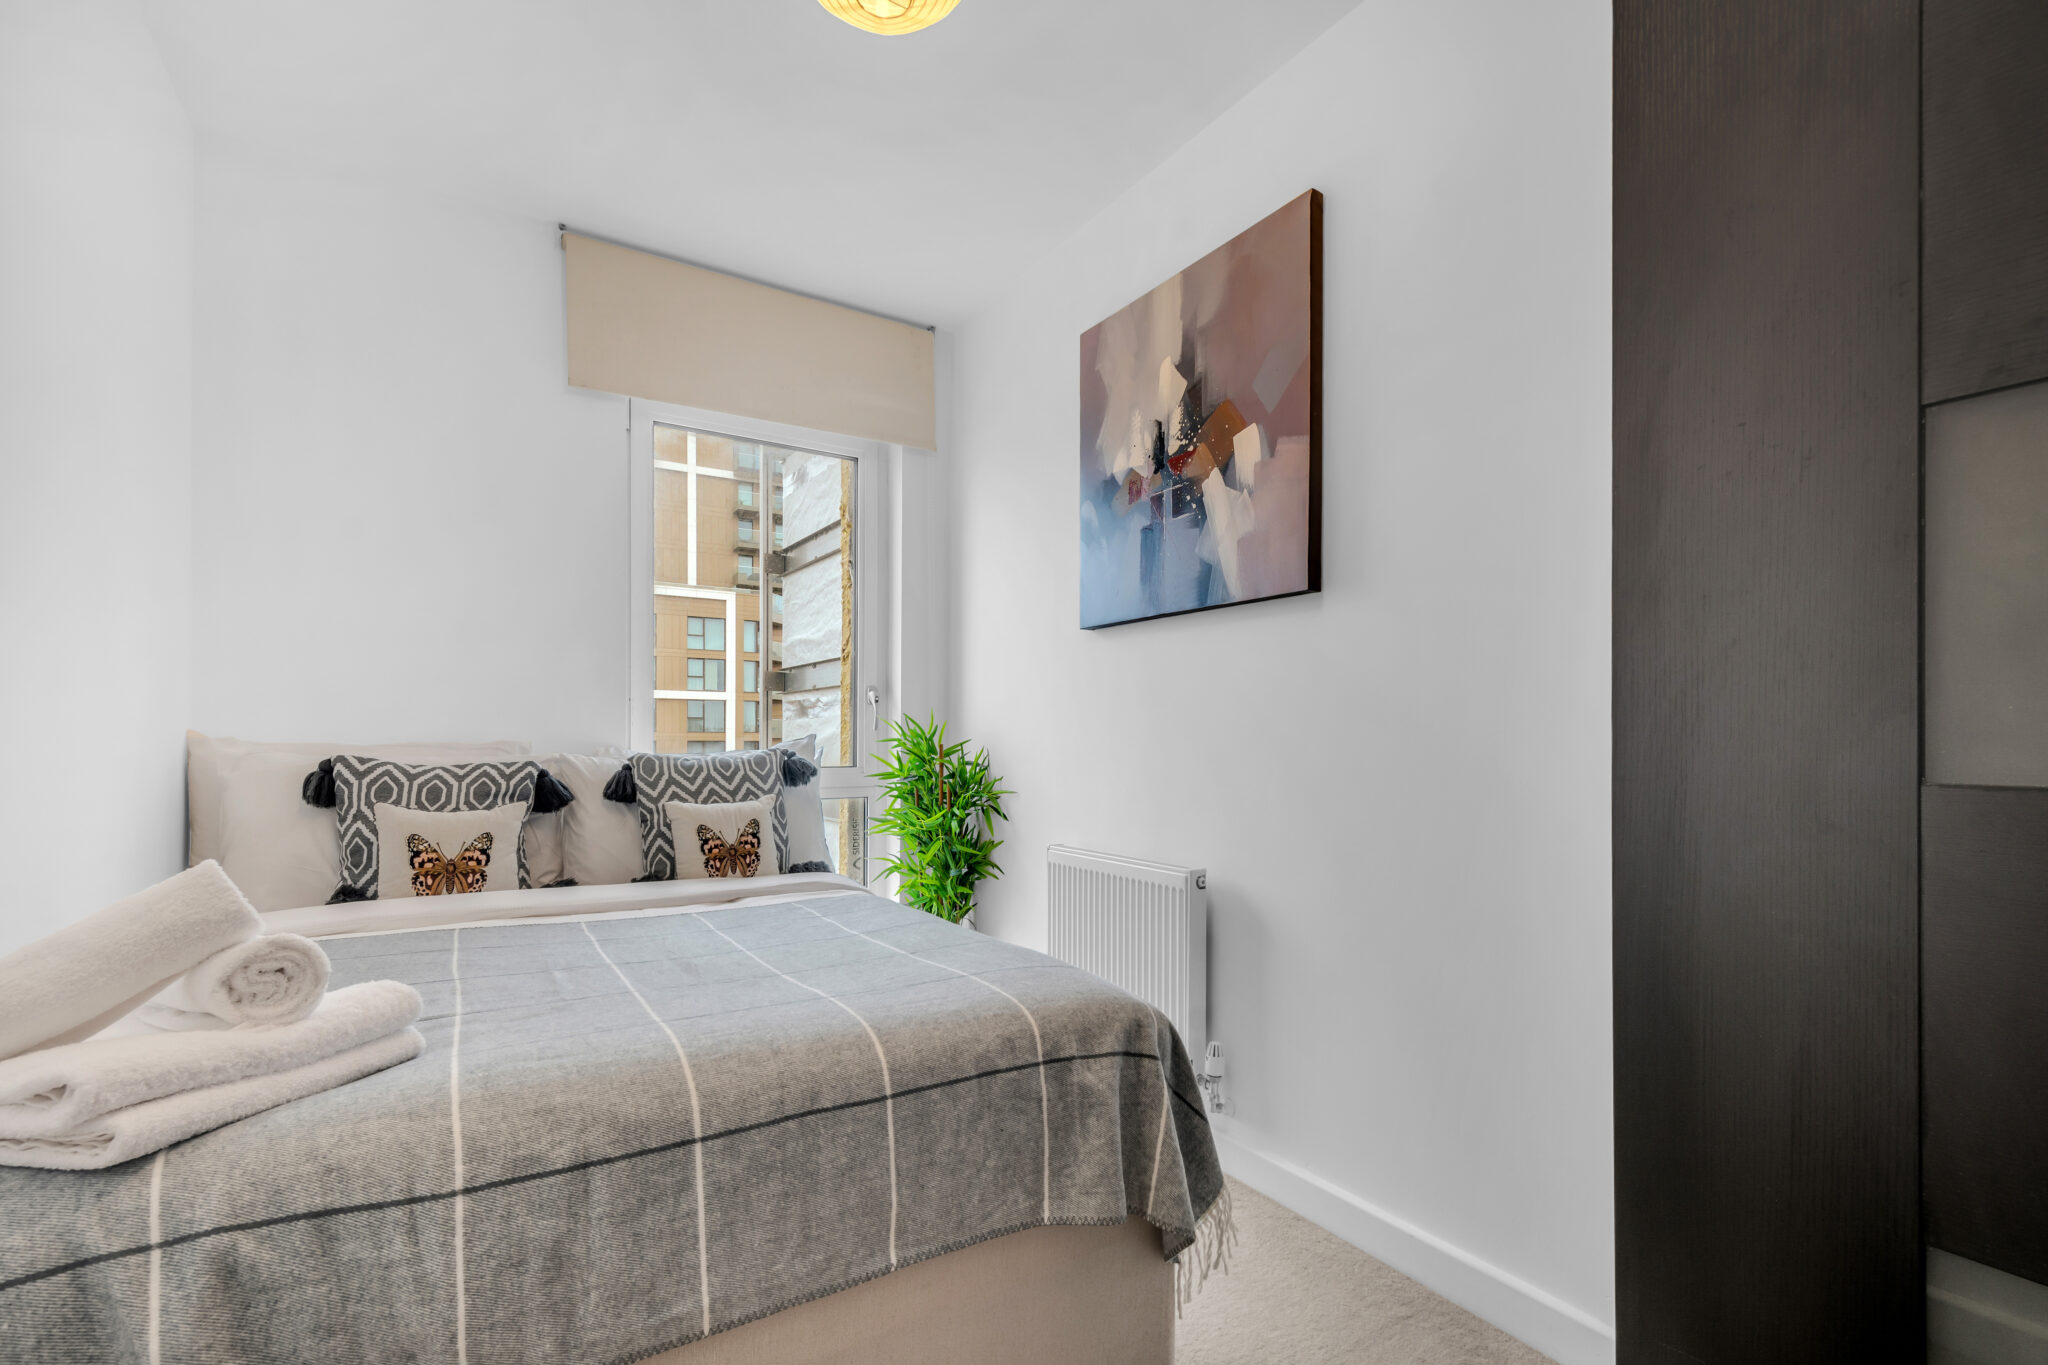 Discover-some-of-the-best-Serviced-Accommodation-in-North-Greenwich-with-our-executive-apartments-near-London's-docklands.-Enquire-today-|-Urban-Stay